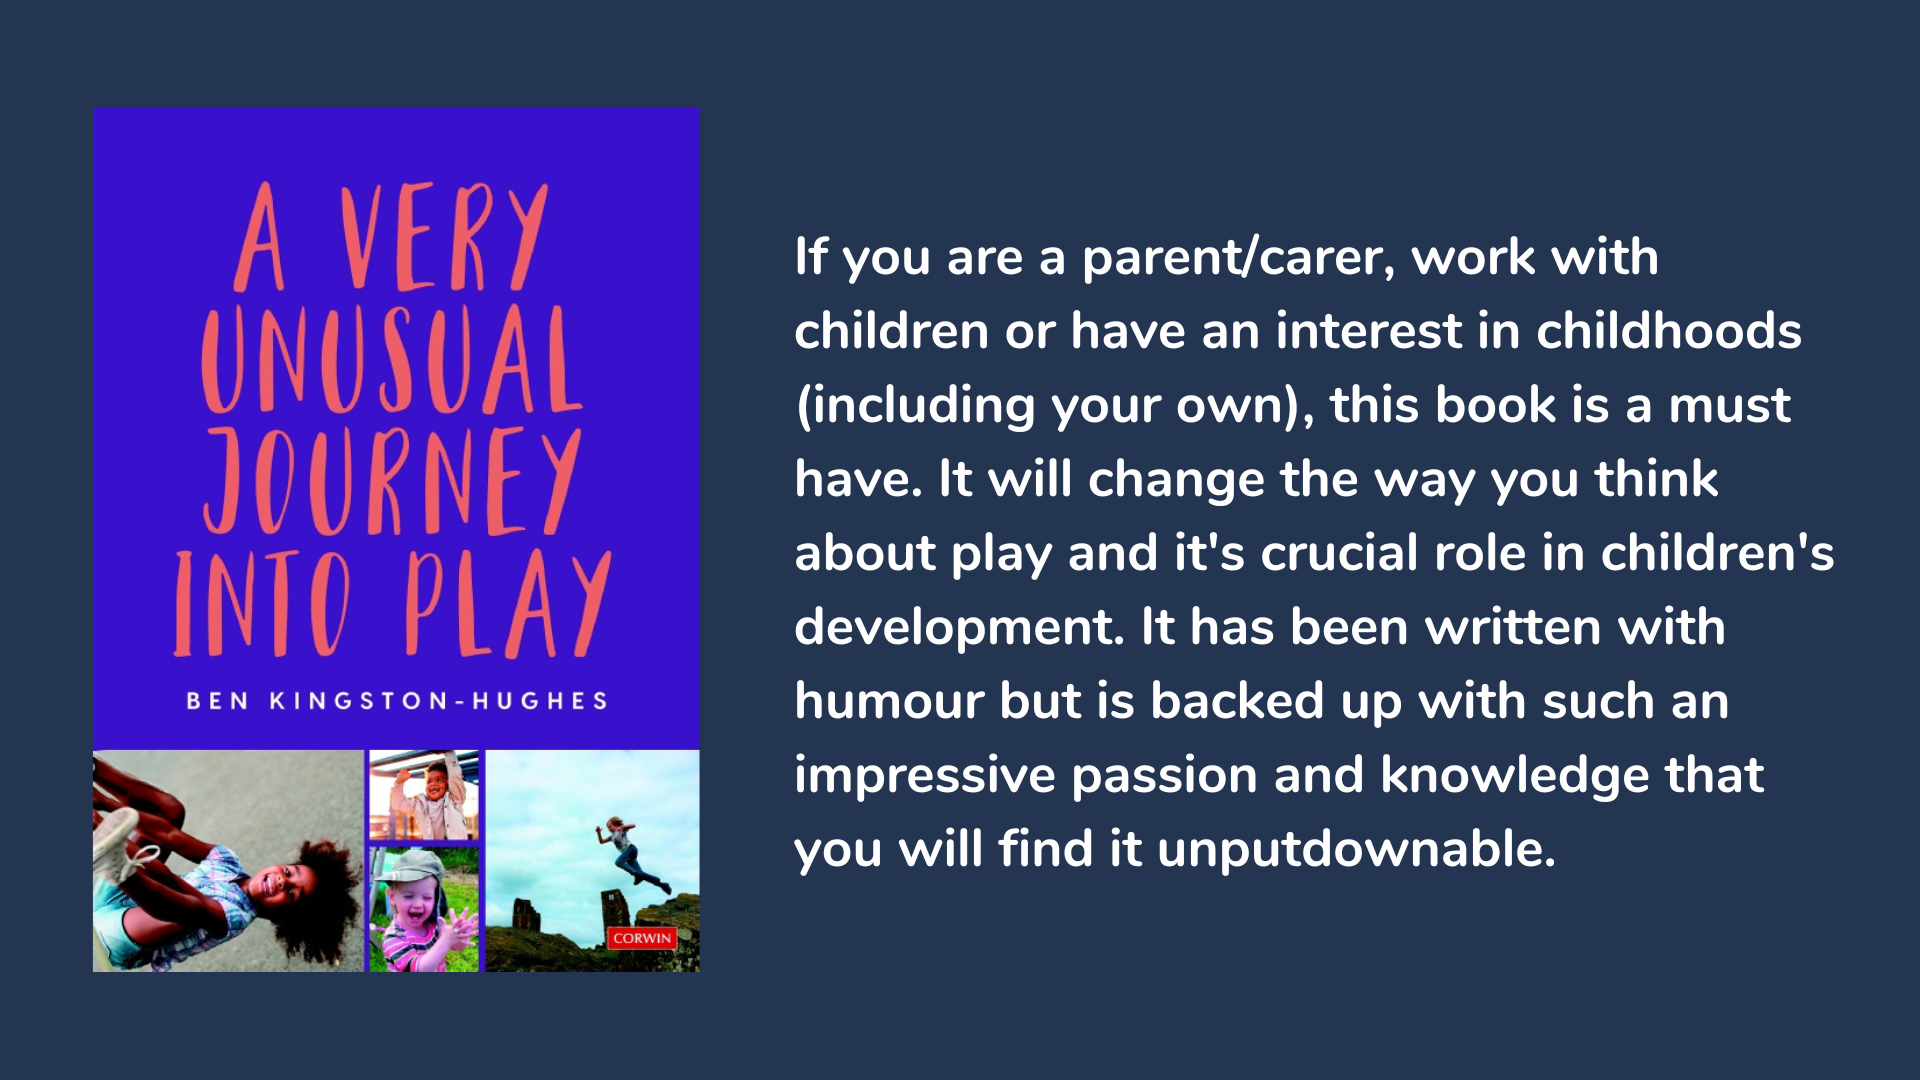 A Very Unusual Journey Into Play, book cover and description.